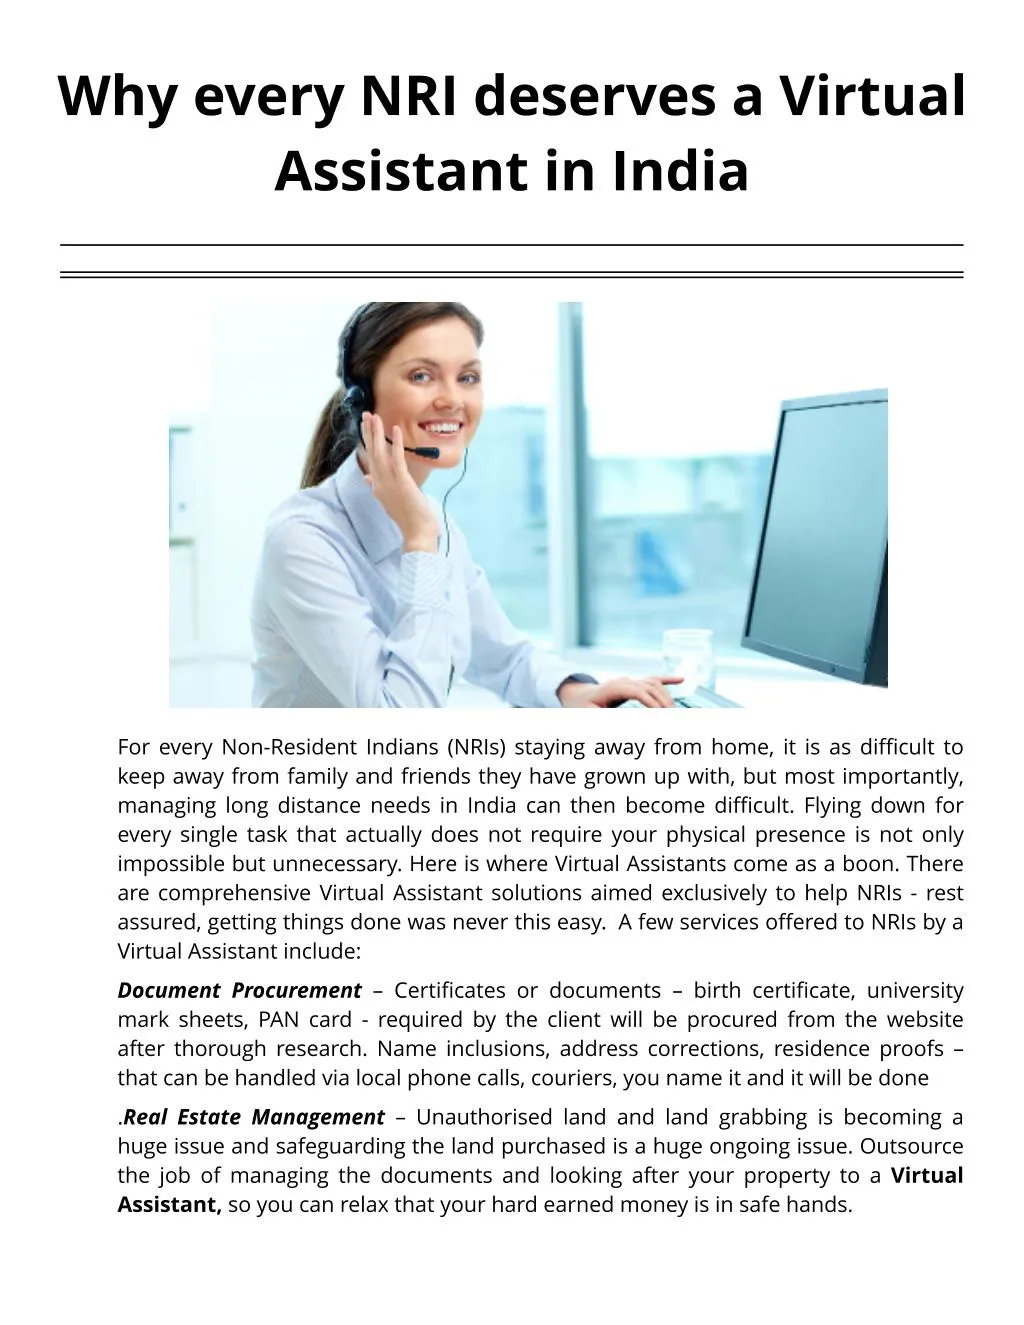 why every nri deserves a virtual assistant